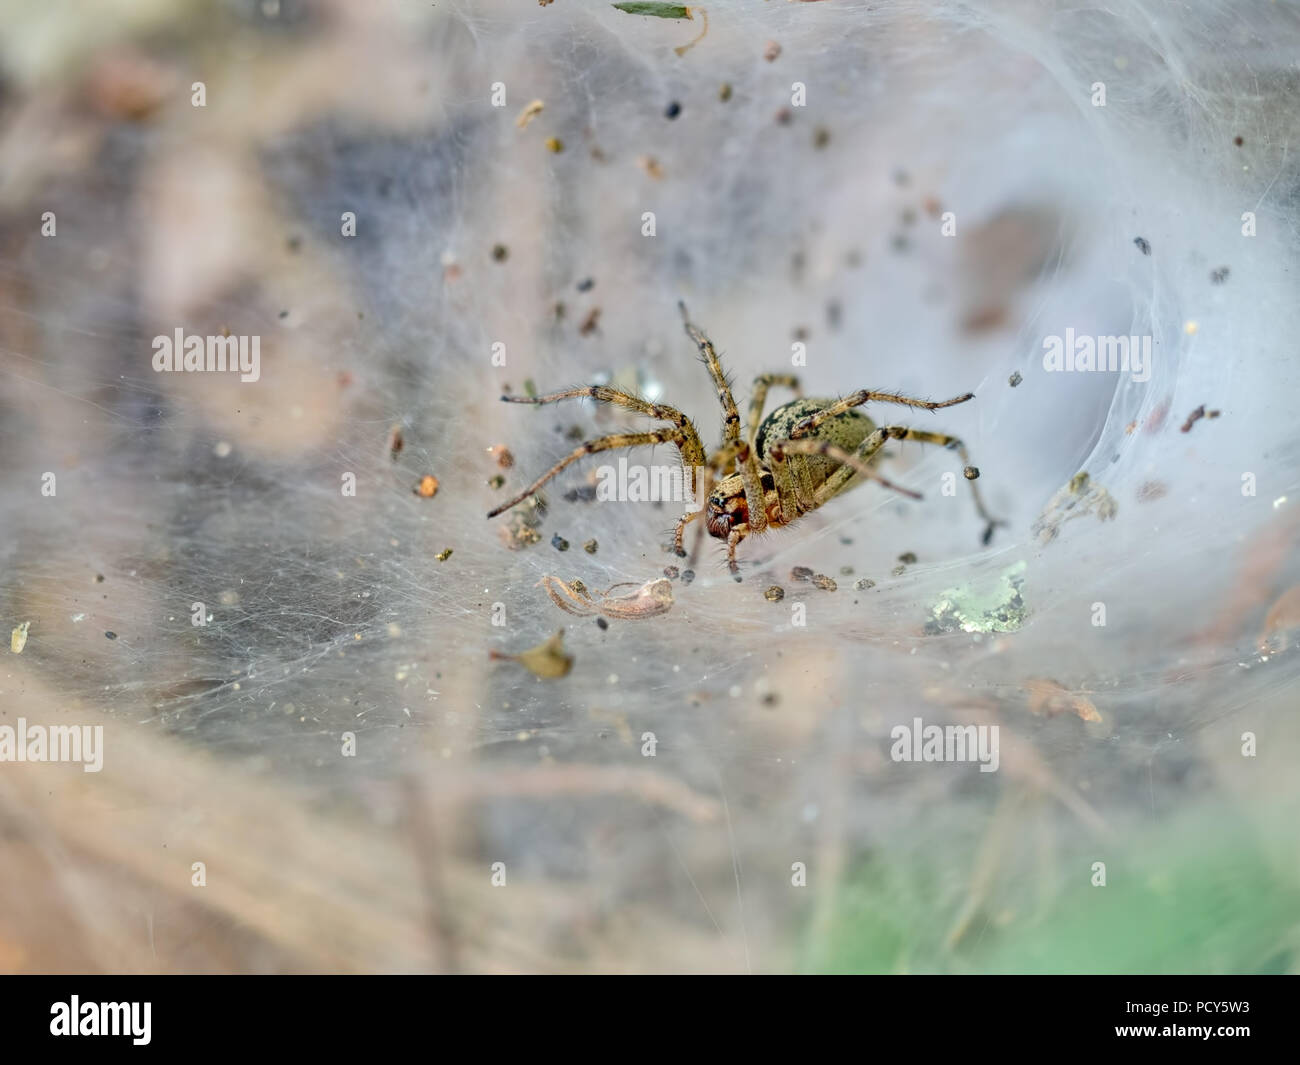 Allagelena gracilens aka funnel weaver spider, in its web. Italy. Stock Photo